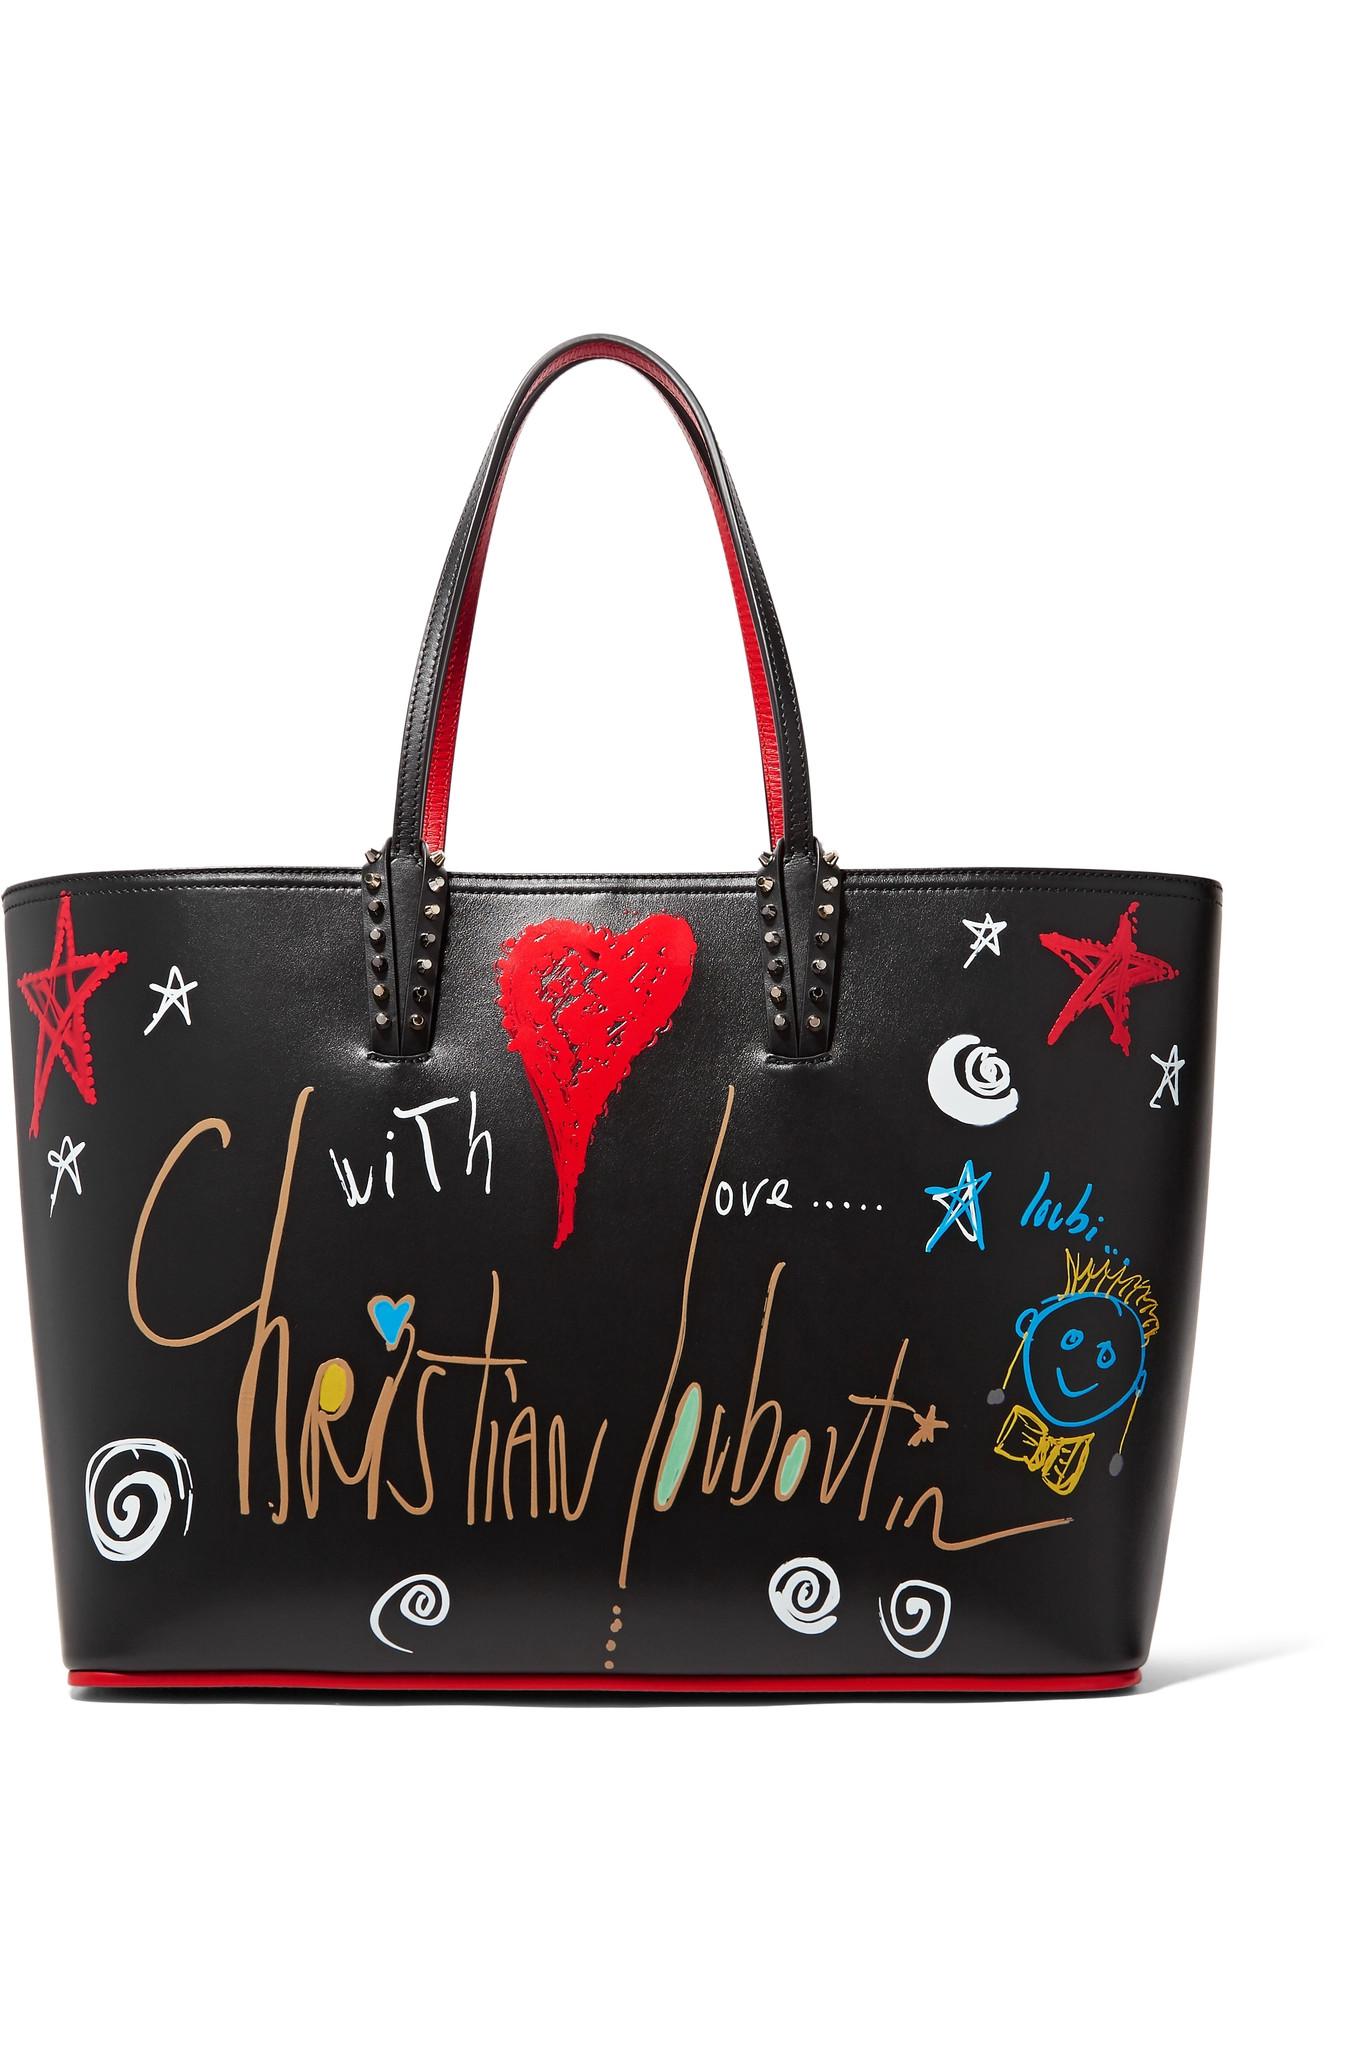 Christian Louboutin CABATA Spiked Studded Empire Leather Tote Bag Large  $1850